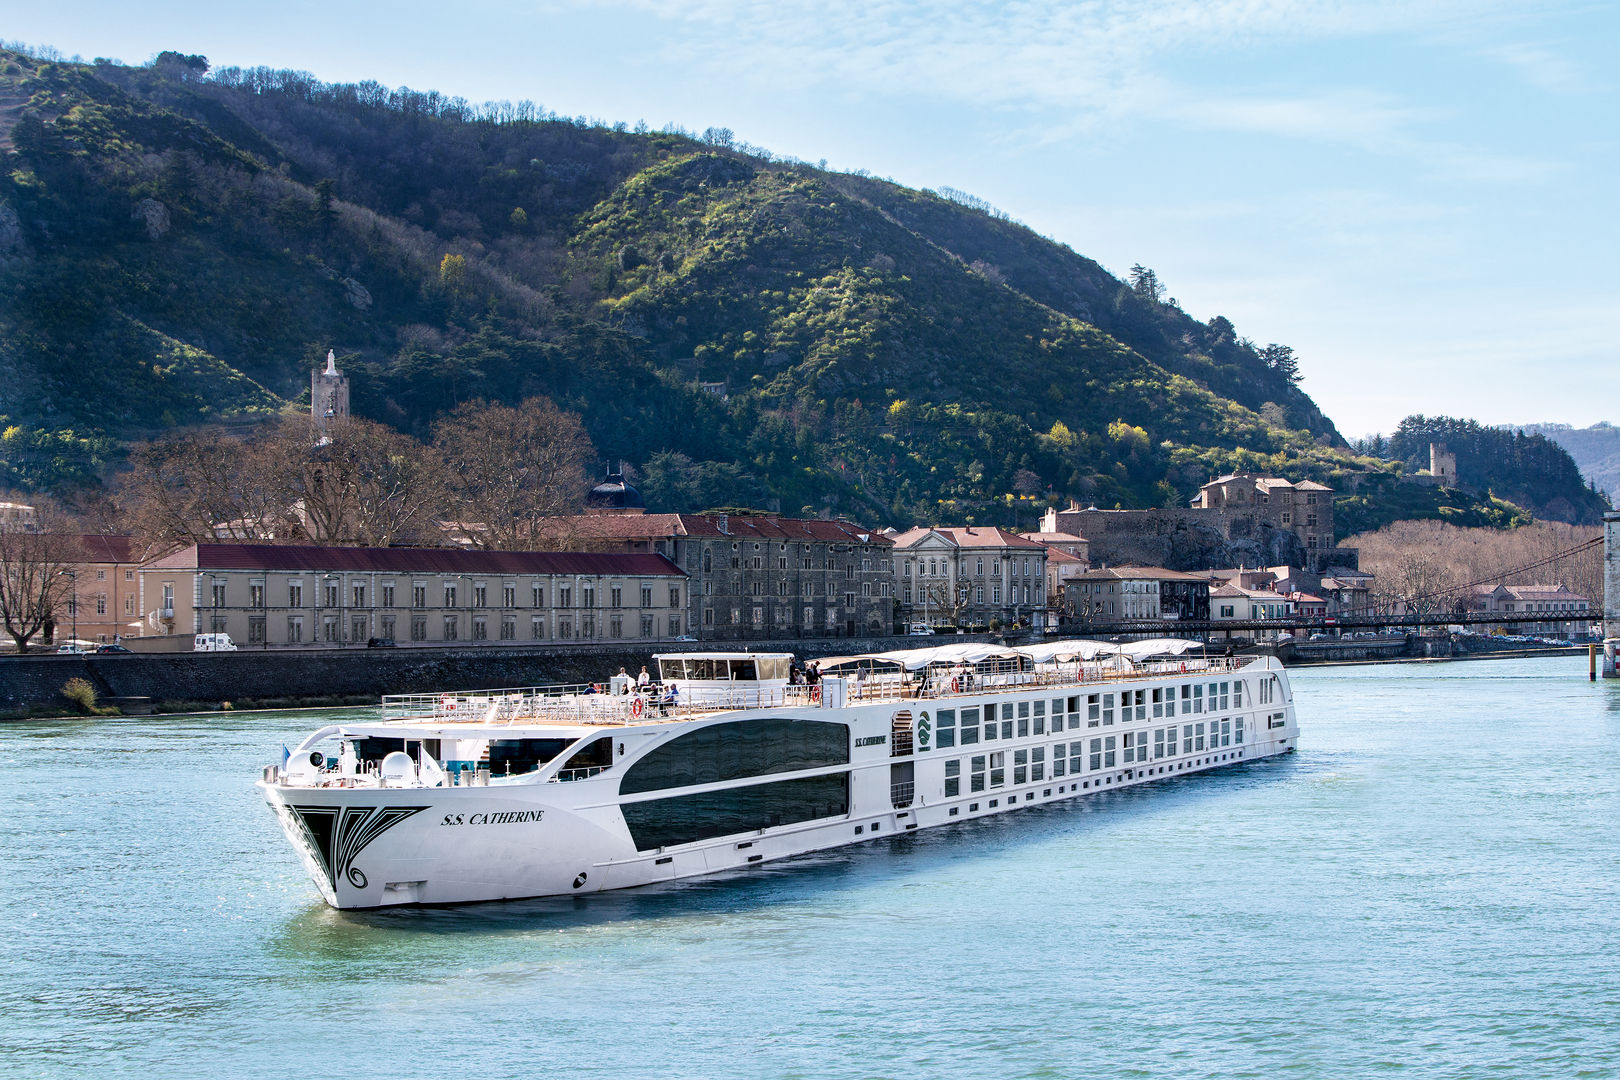 Summer Sale: 50% off on5-Star luxury European river cruises with Uniworld